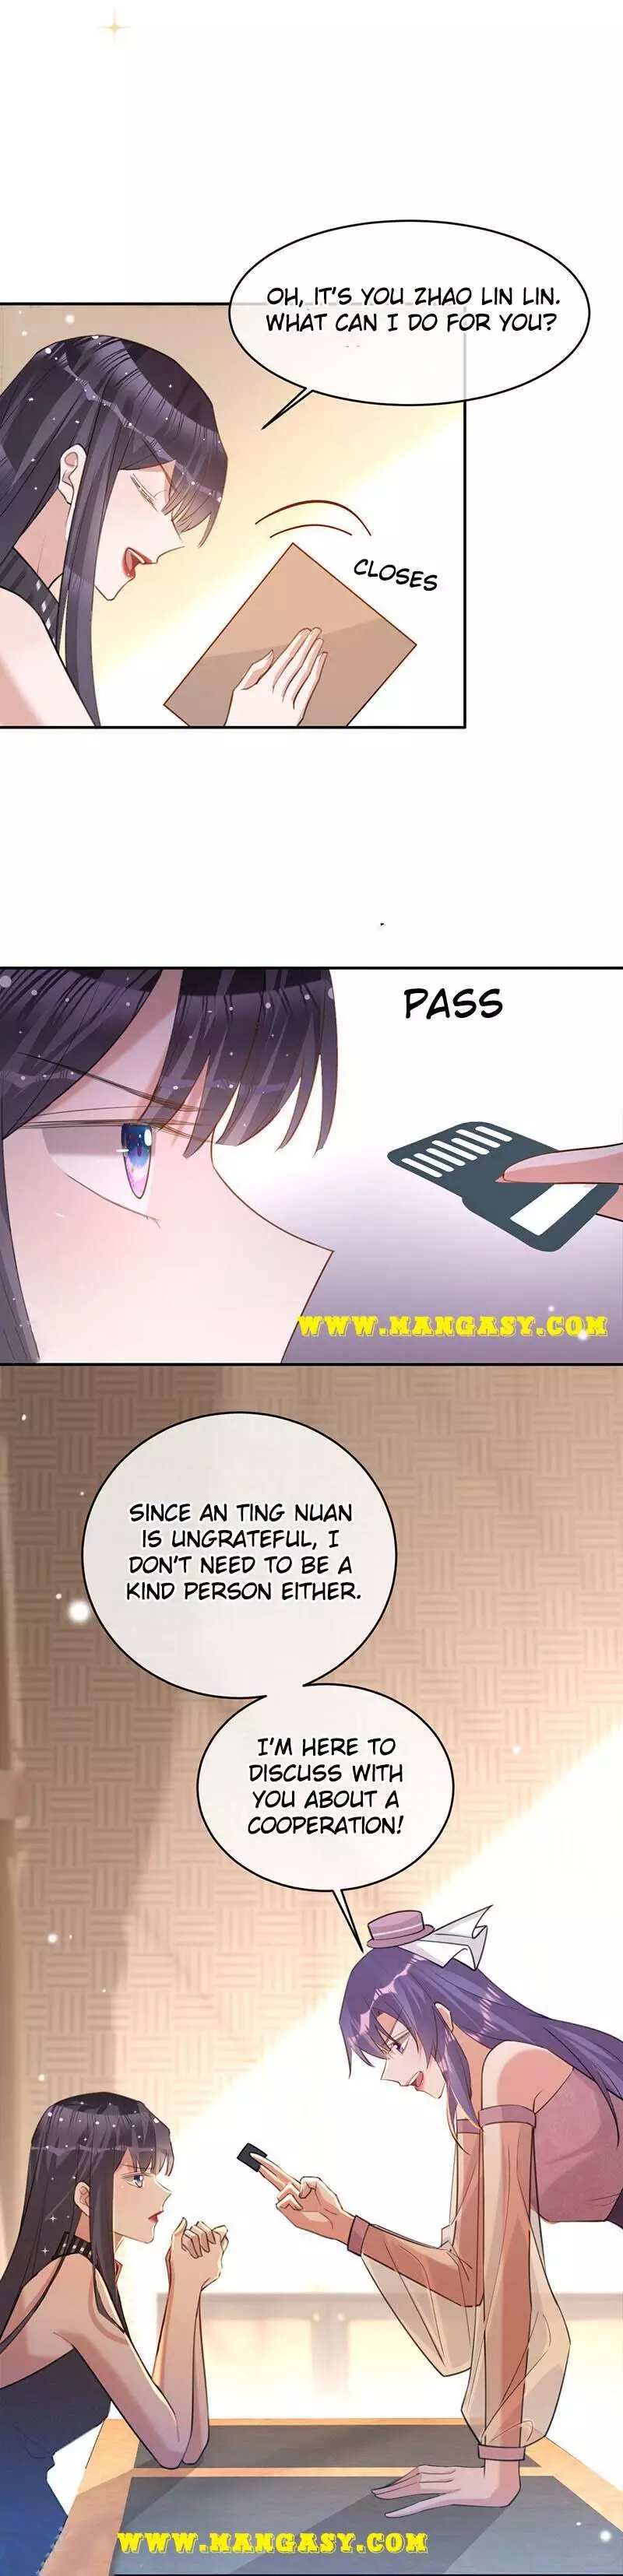 In The Name Of Marriage - 81 page 11-79c3139f